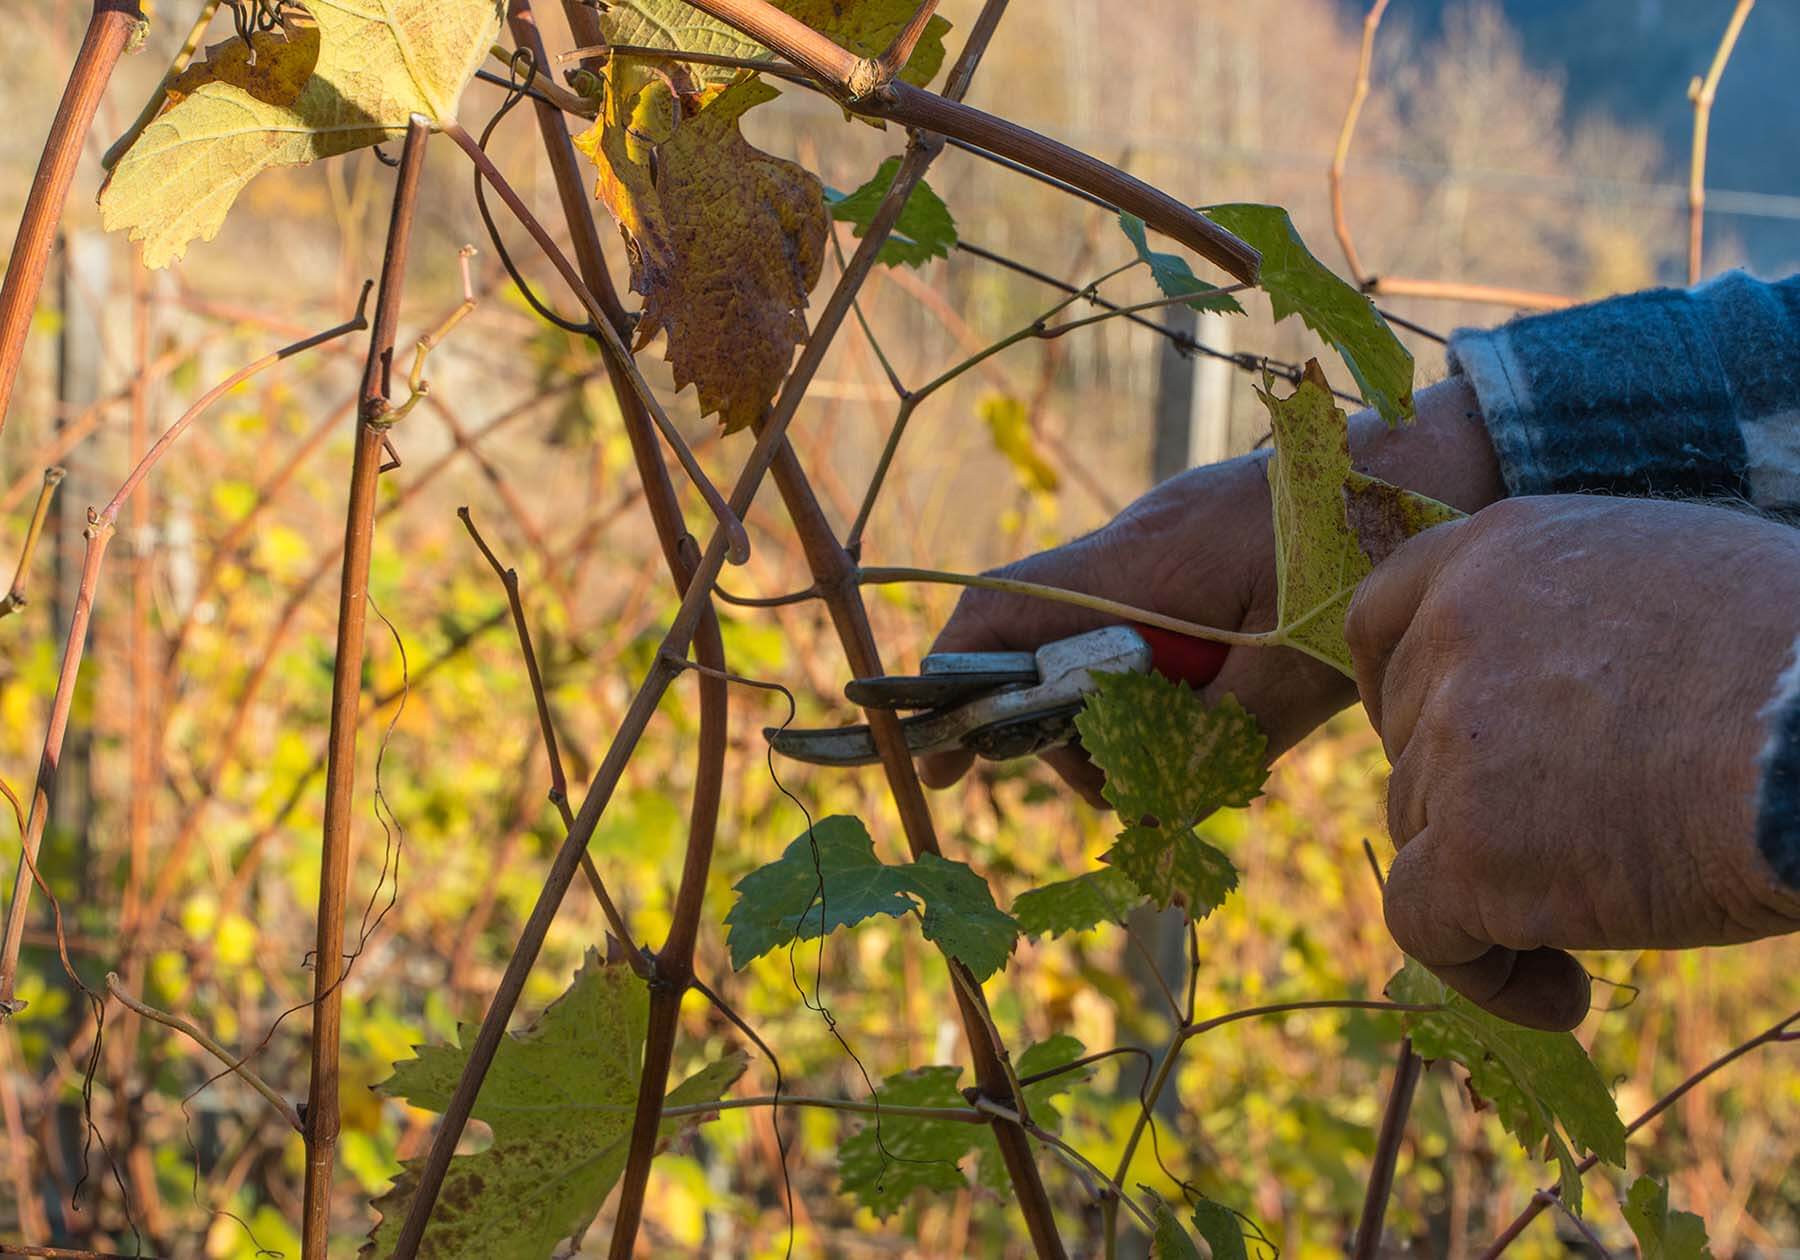 Cleaning and pruning of vines